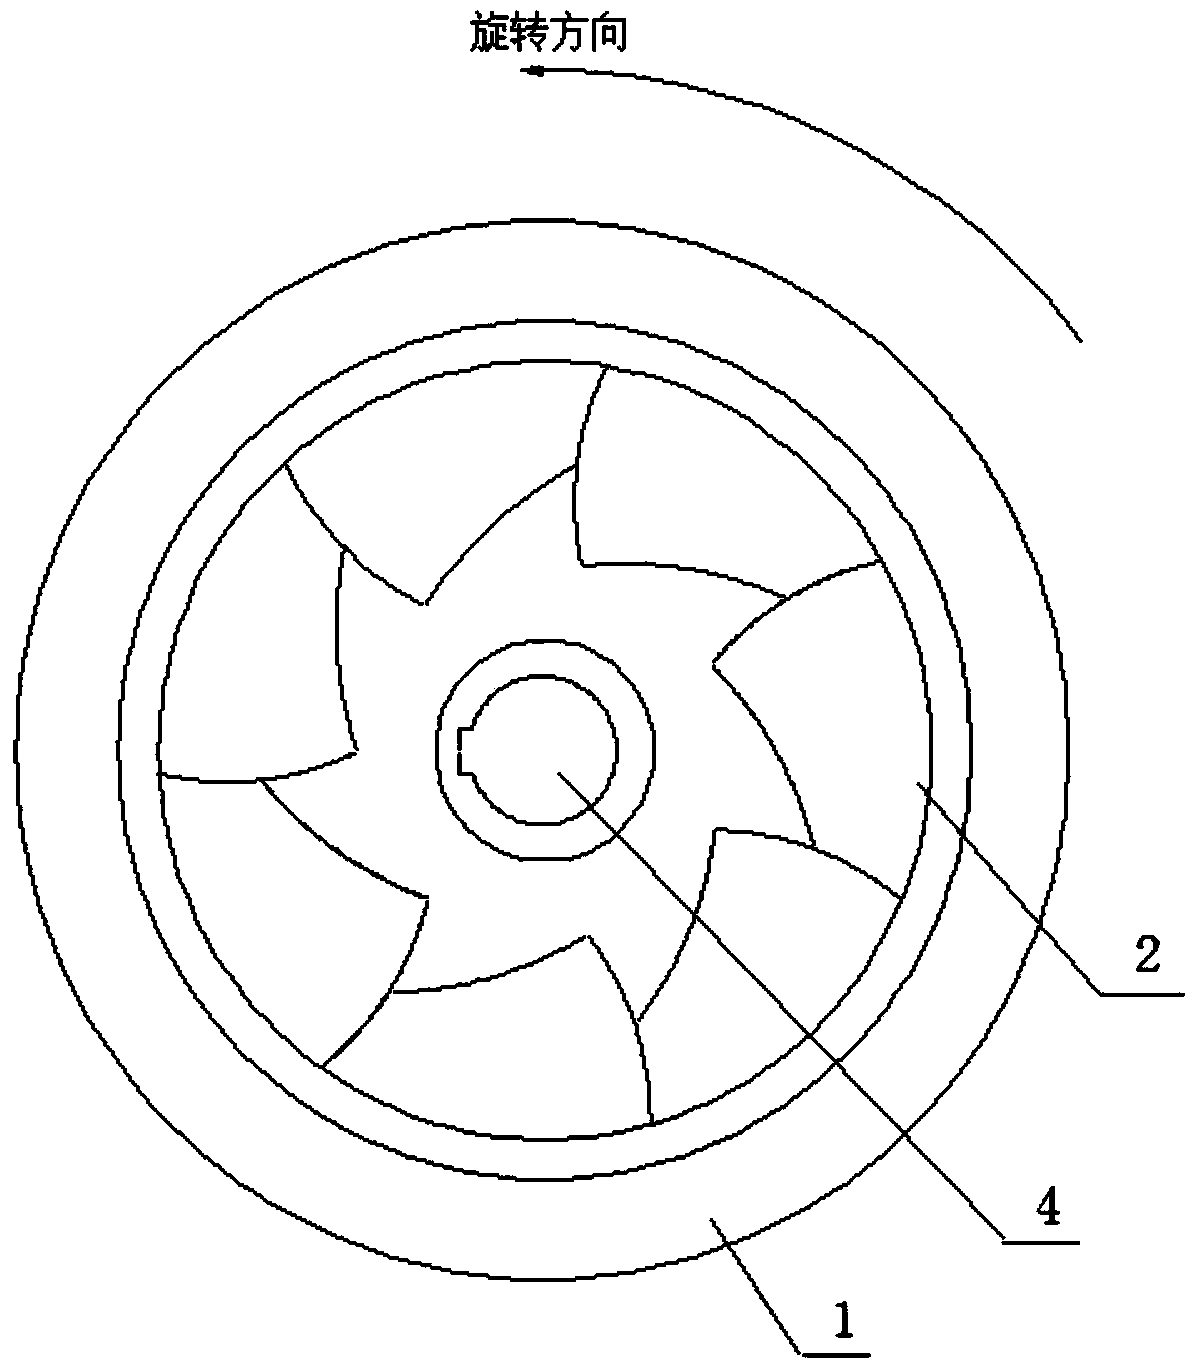 Hydraulic design method of high-cavitation-resistance nuclear main pump impeller and high-cavitation-resistance nuclear main pump impeller